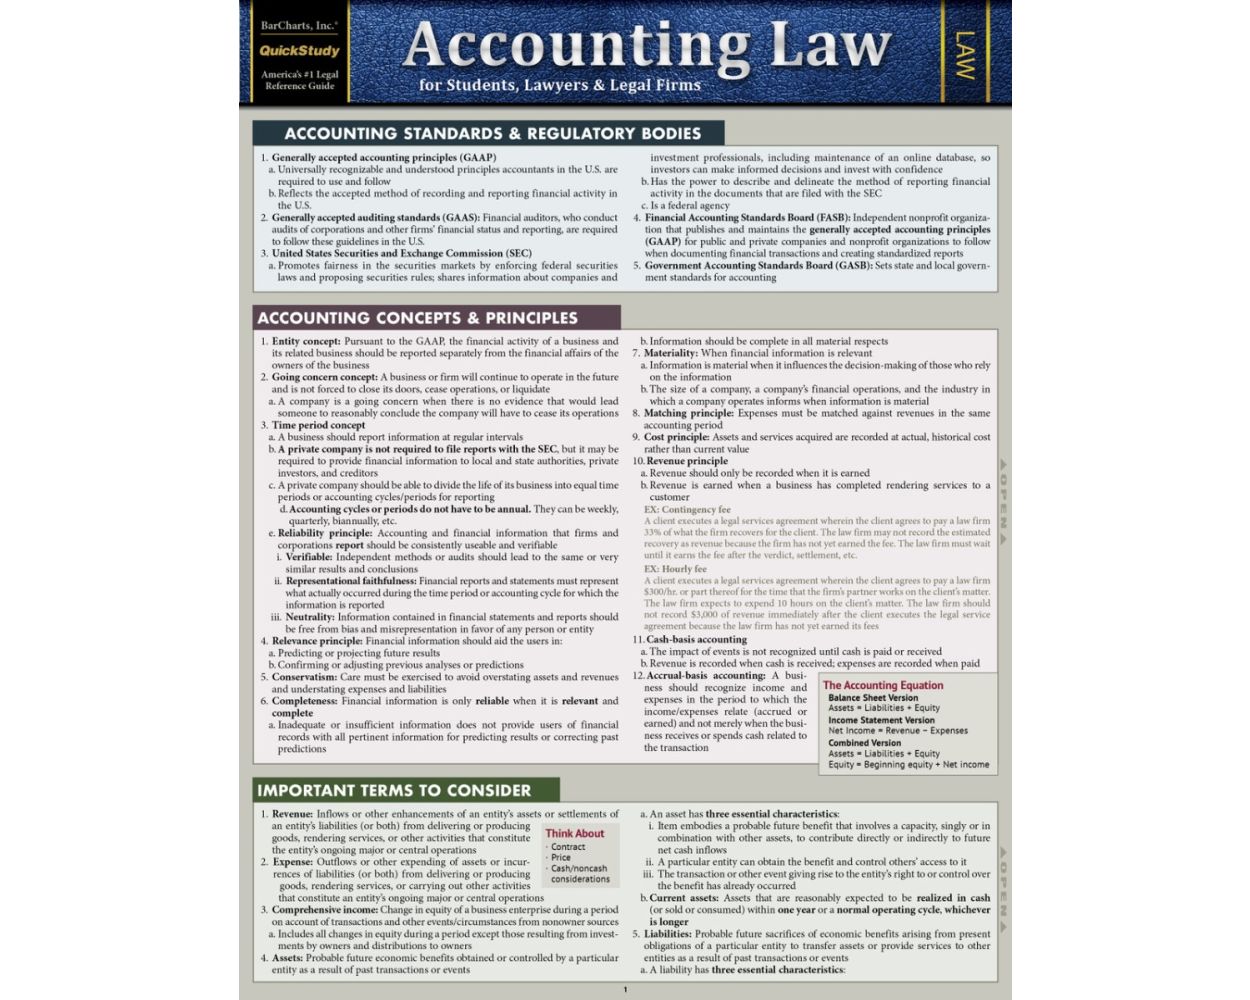 Buy QuickStudy Accounting Law Laminated Reference Guide